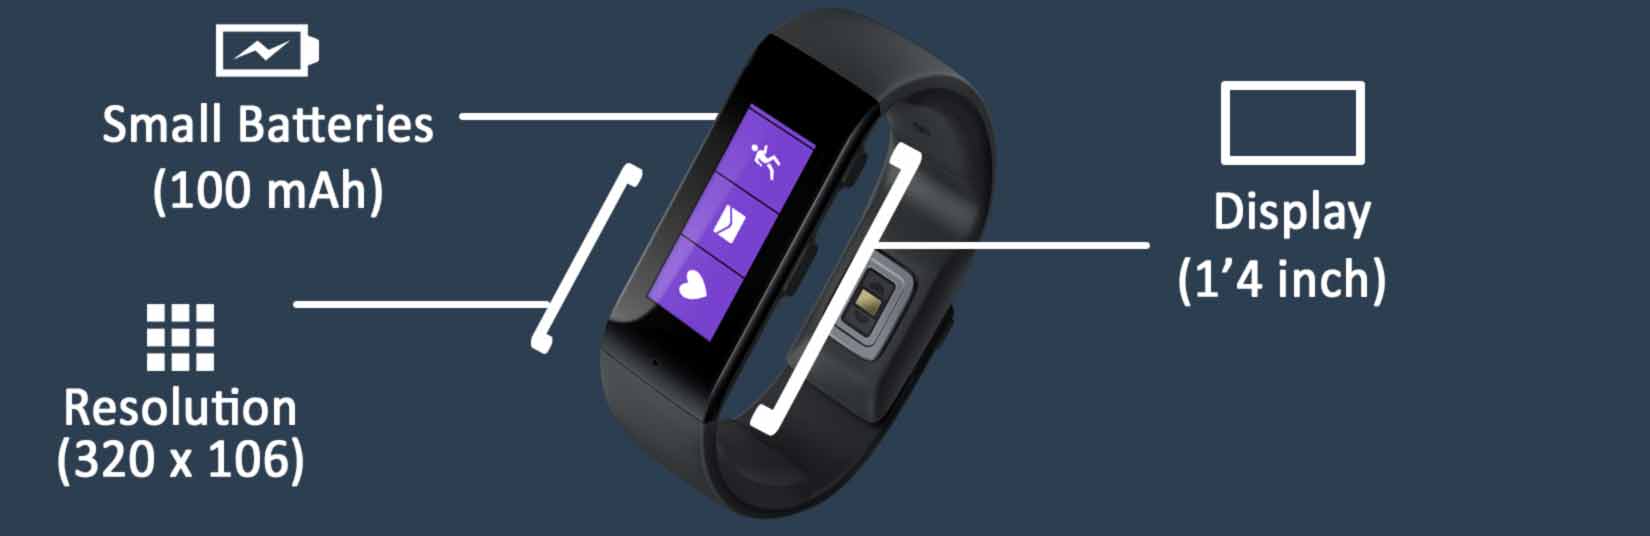 Specifications of the Fitness Band